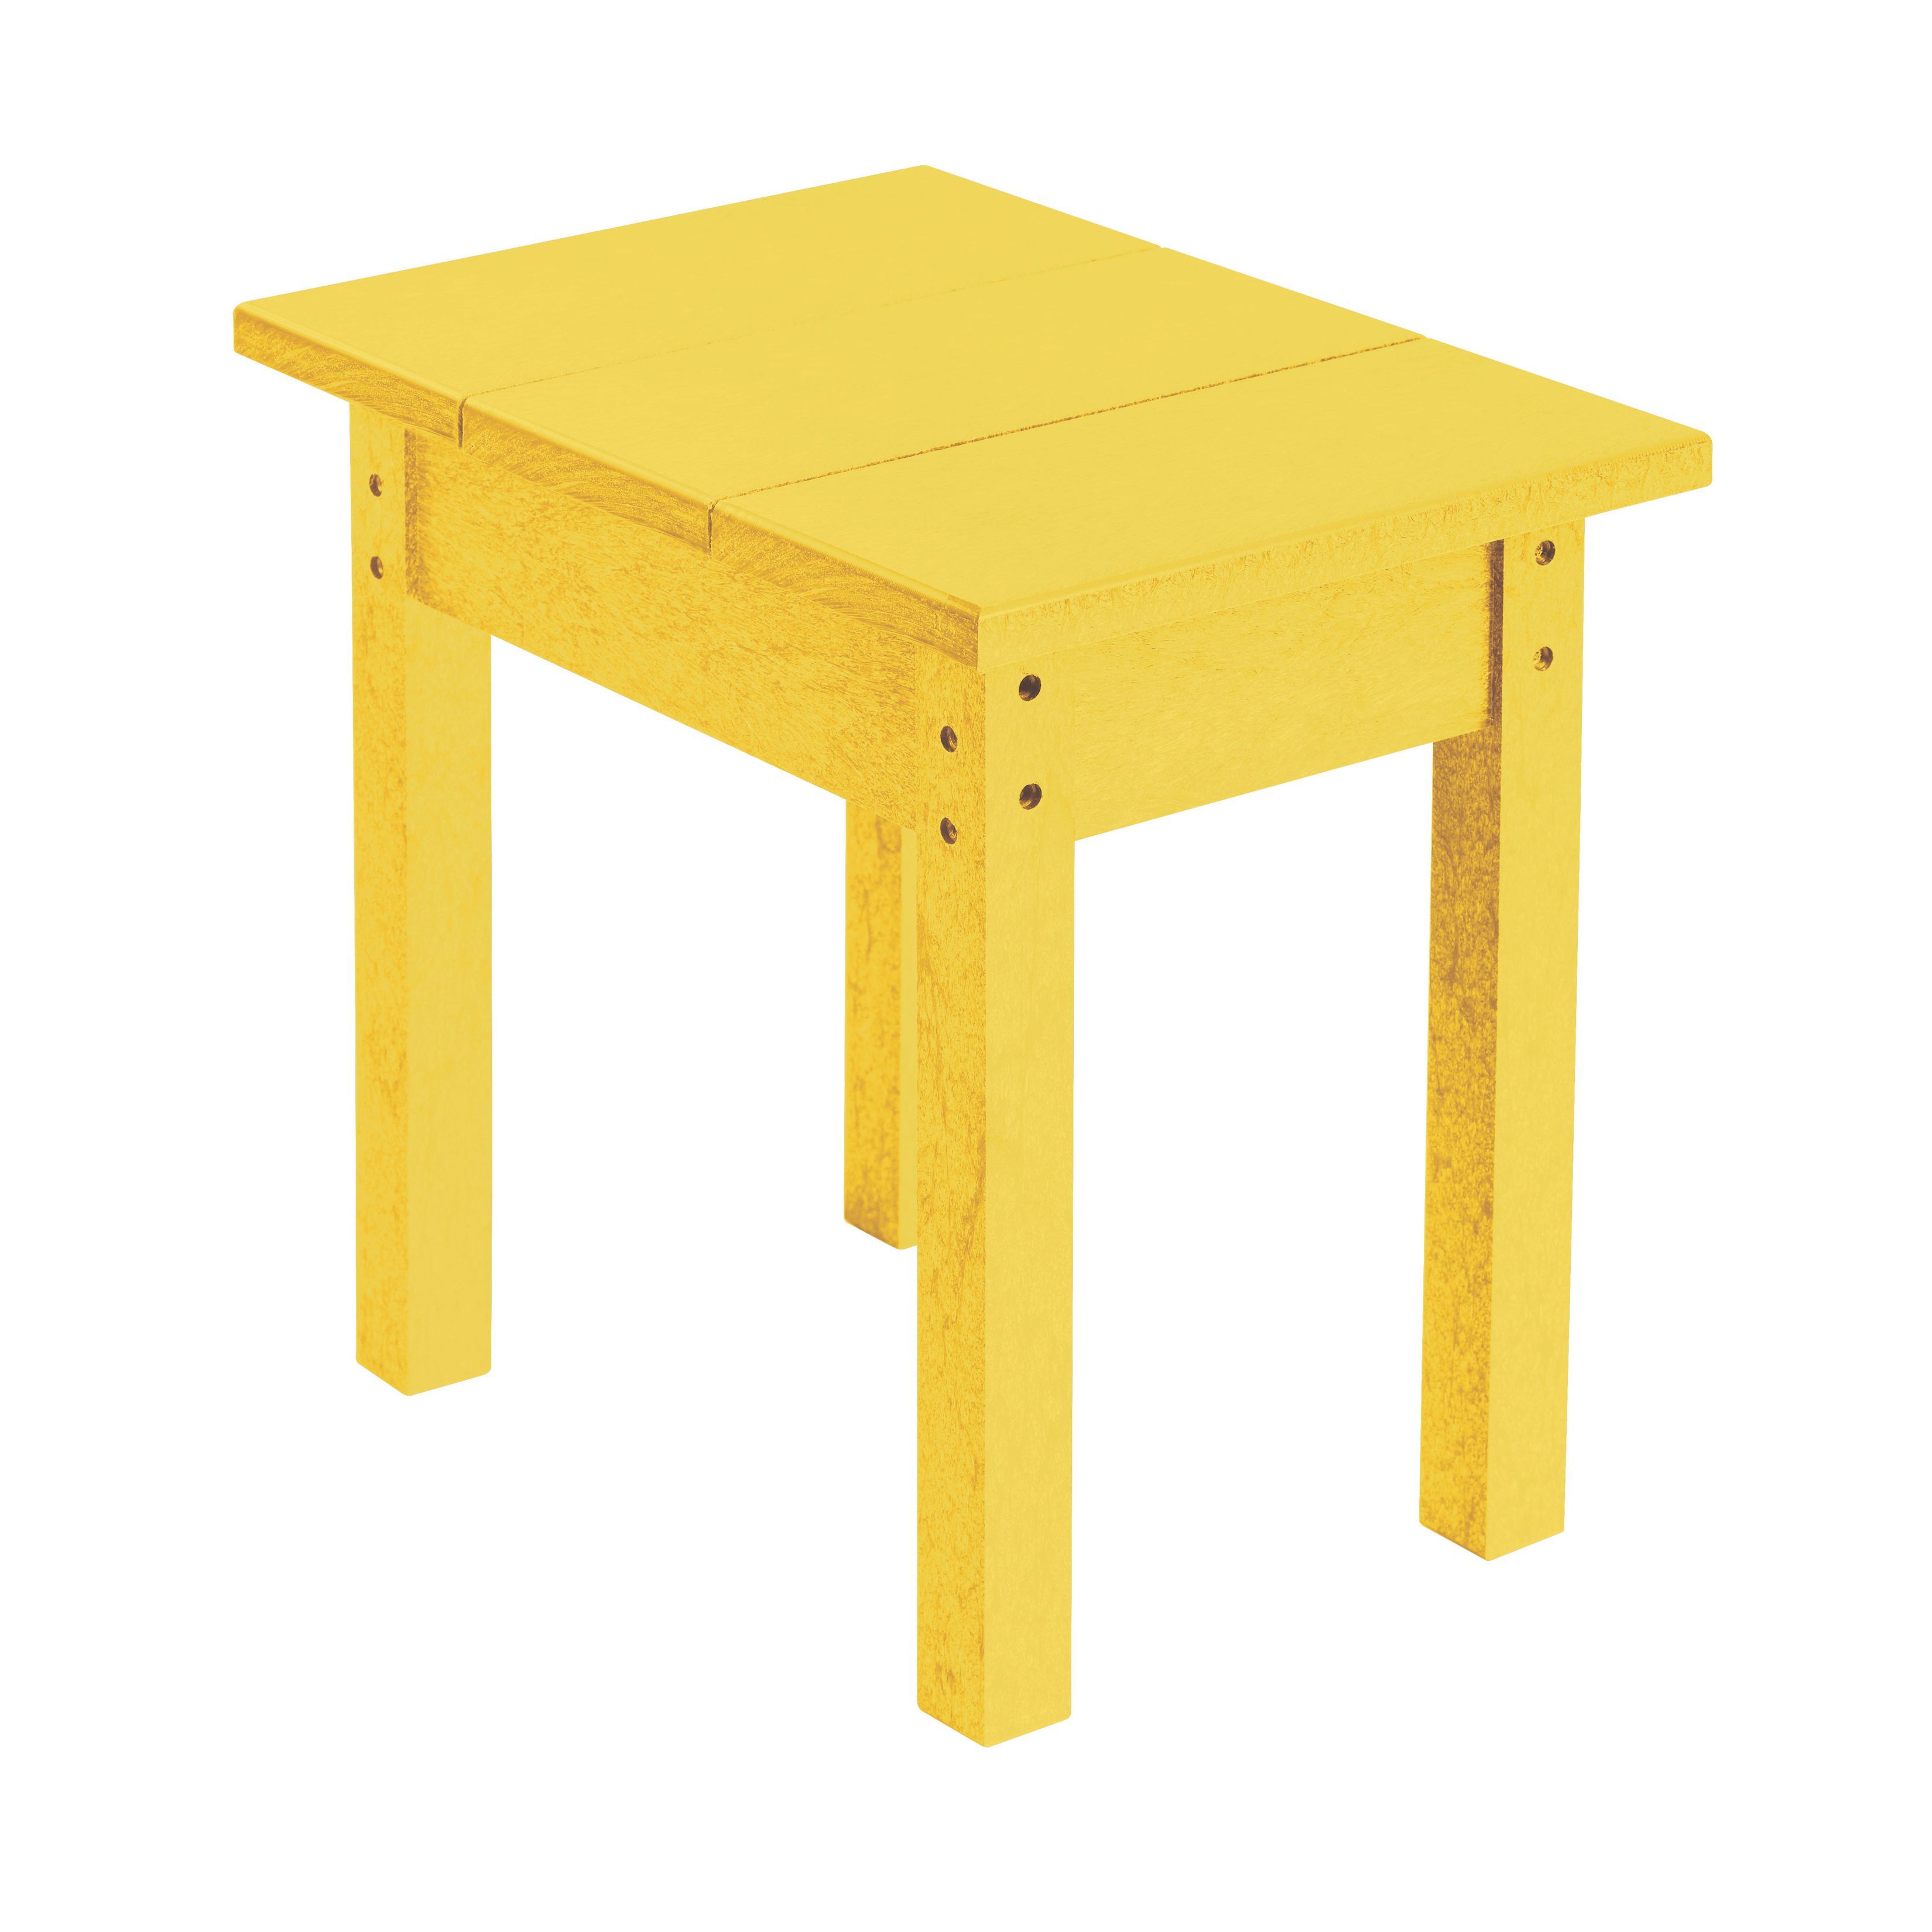 plastic products generations yellow small side table patio outdoor accent furniture shaped office desk with umbrella ikea lamp shades porch black and white chair large